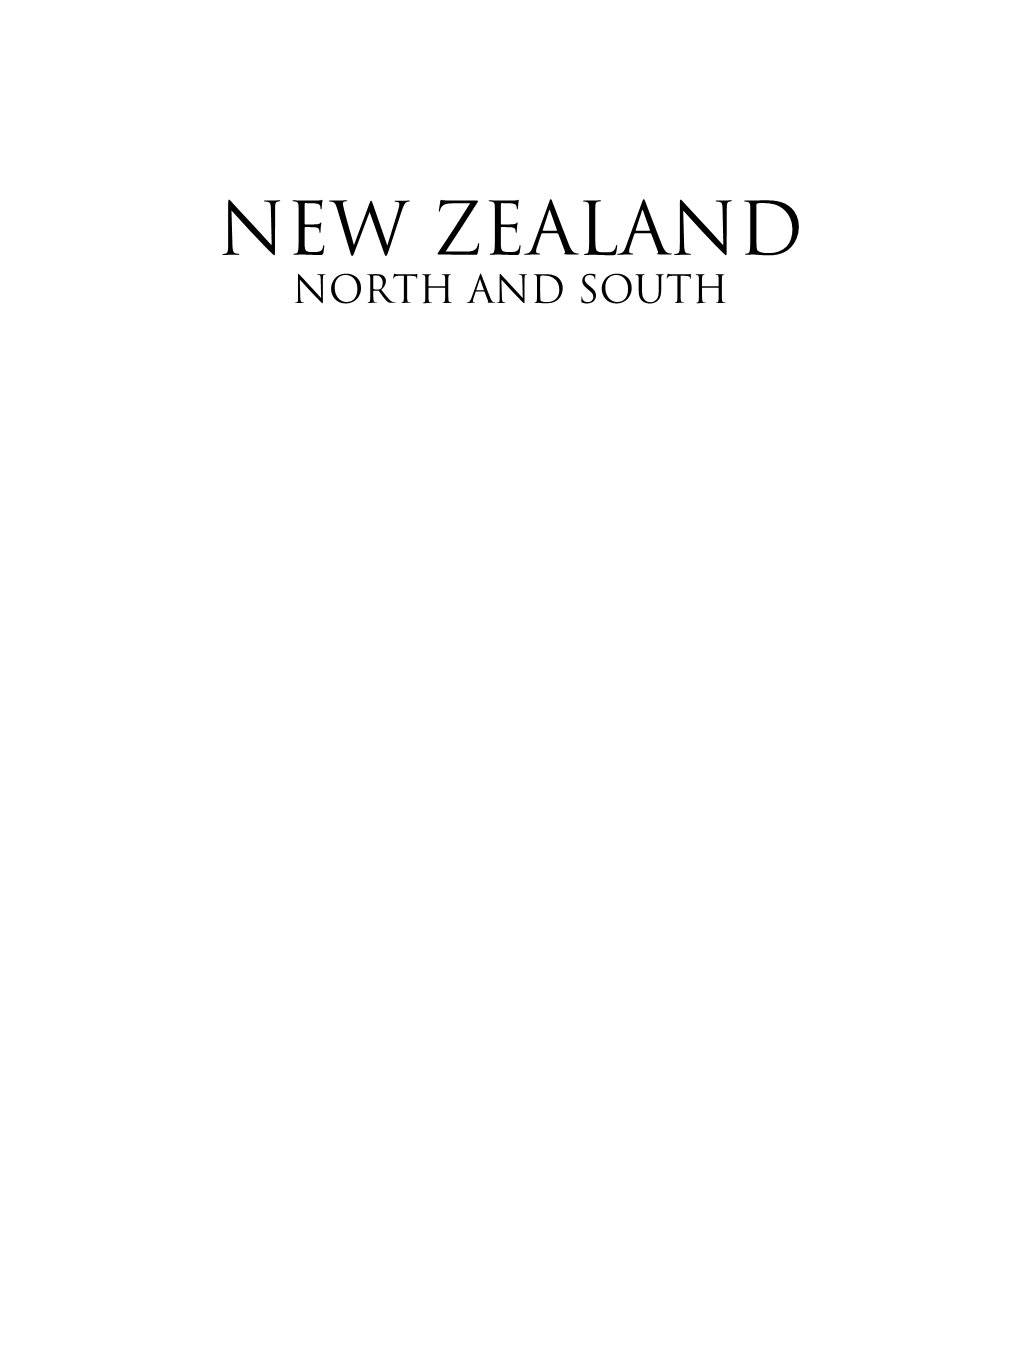 New Zealand NORTH and SOUTH Contents